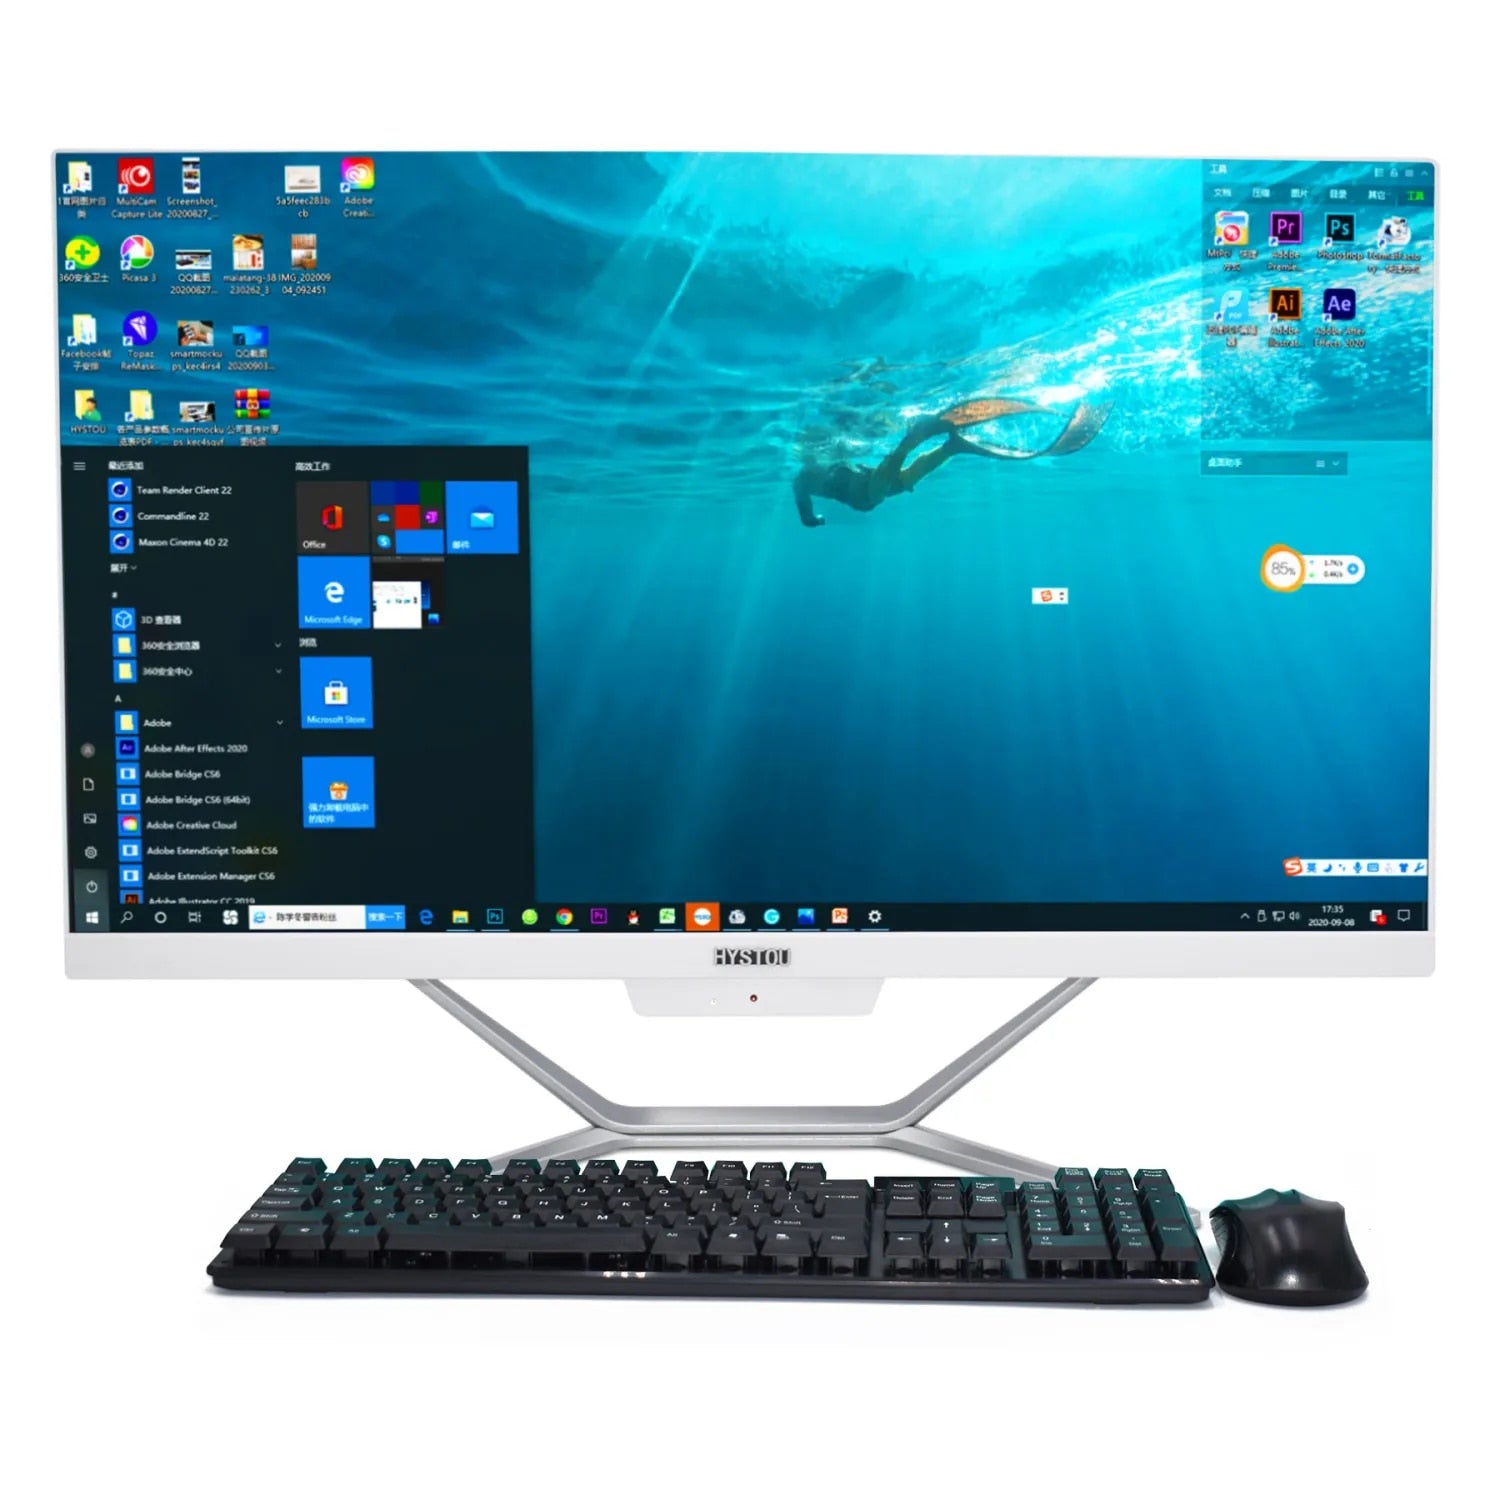 HYSTOU Factory Home Office Computer 23.8 Inch Core i5 i7 32GB DDR4 LCD Screen HD 4K  All In One Desktop PC